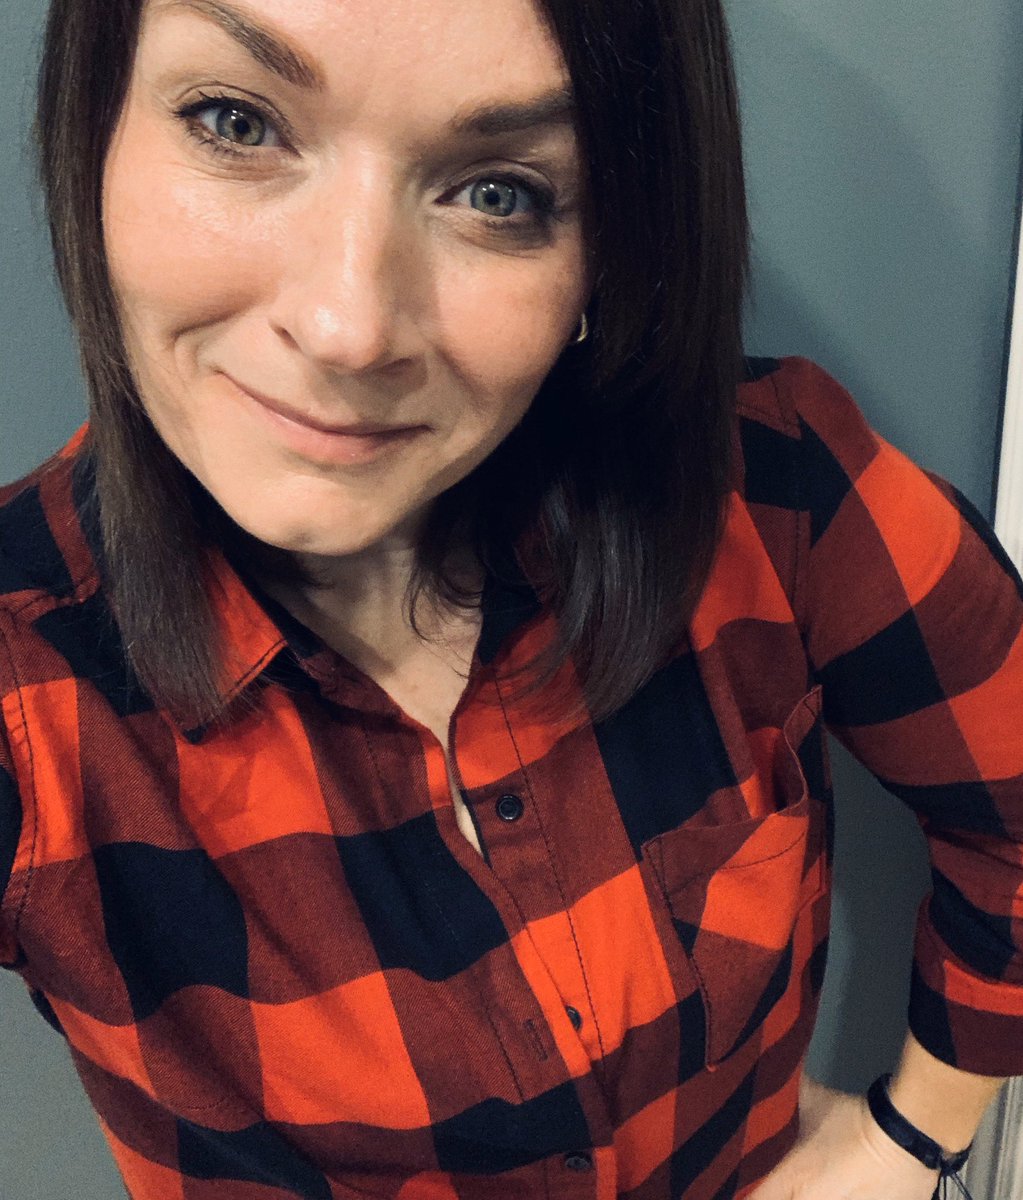 It’s #RedForEd and I’m sporting the #lumberjackplaid in #solidarity with all my @AEFO_ON_CA @ETFOeducators @OECTAProv @osstf colleagues and friends because #CutsHurtKids